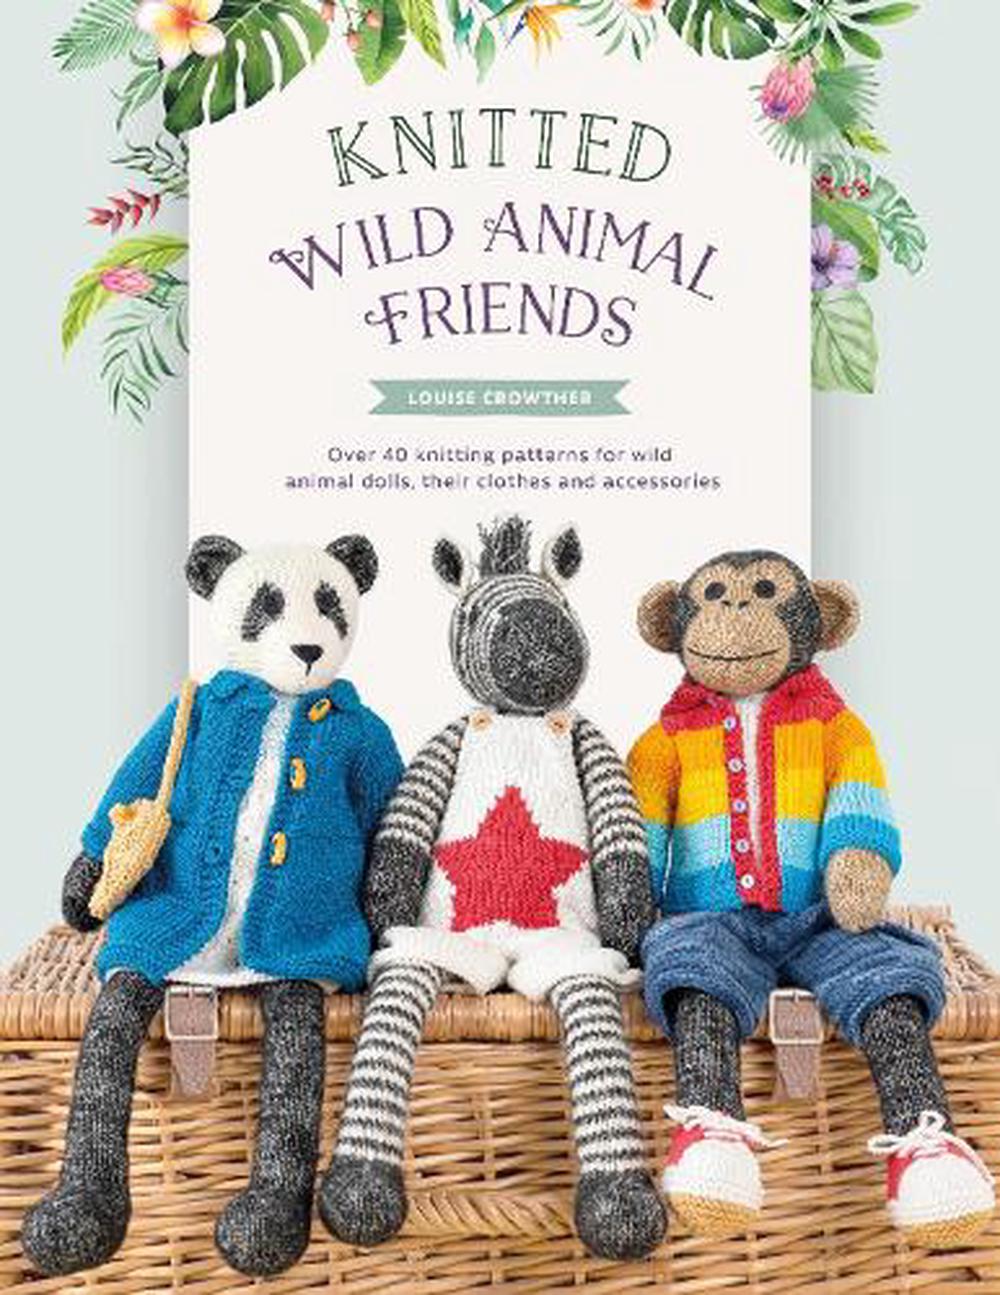 Knitted Wild Animal Friends by Louise Crowther, Paperback, 9781446309087 |  Buy online at The Nile